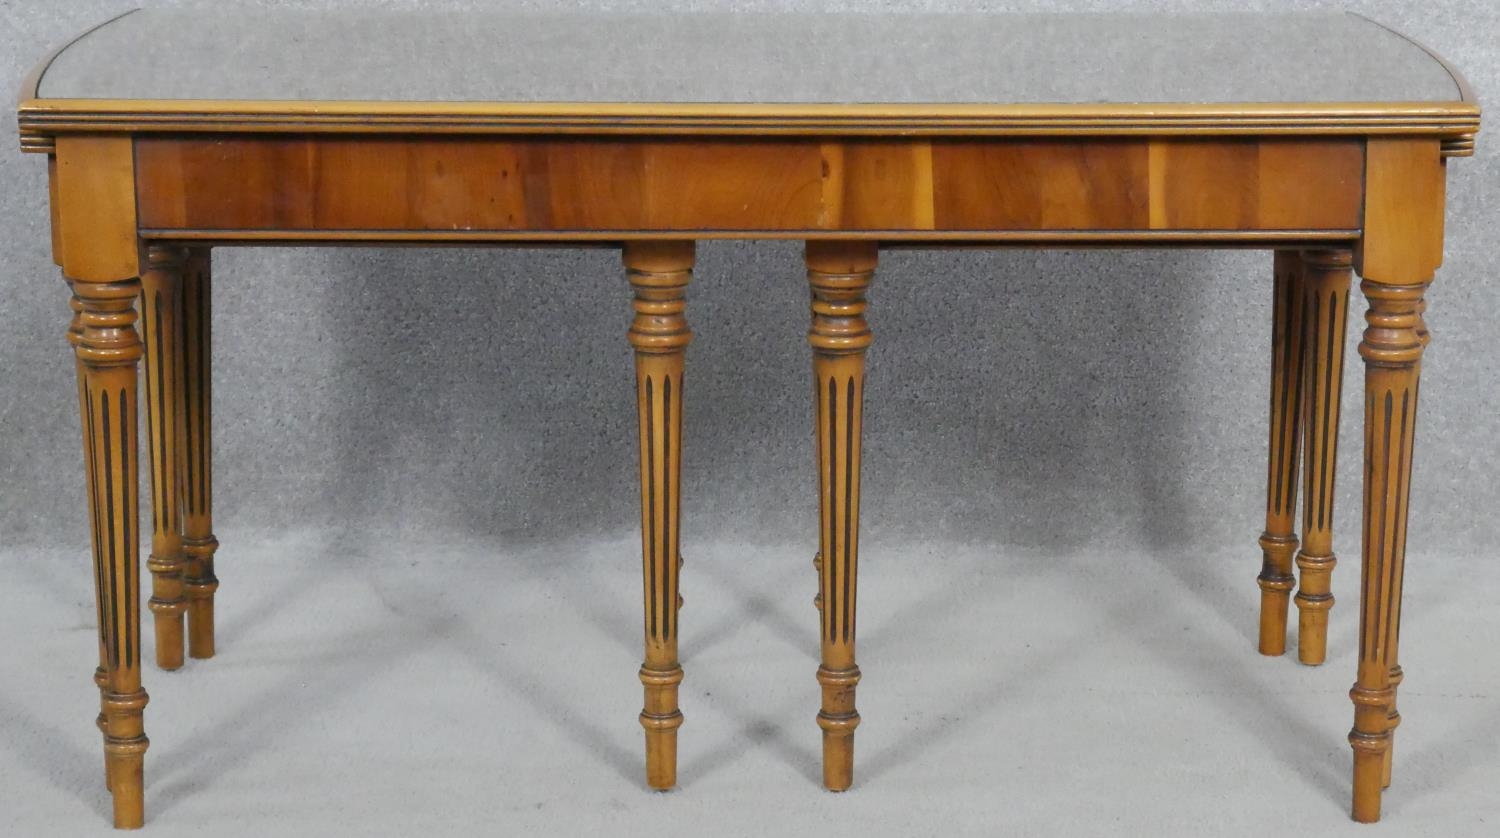 A nest of Regency style yew wood occasional tables with plate glass and inset tooled leather tops on - Image 2 of 6